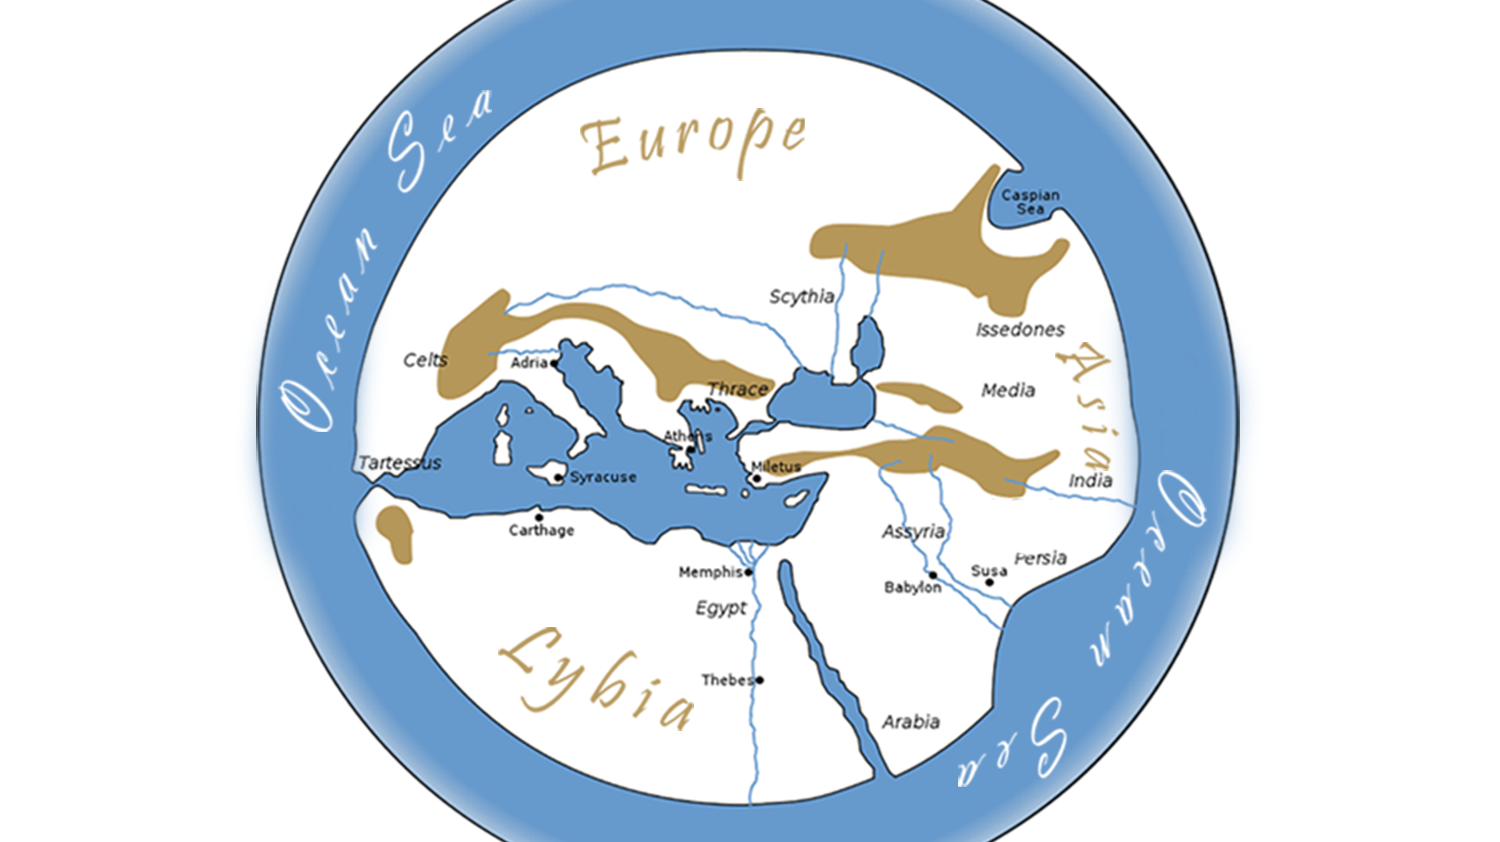 The First Map: The World According to the Early Greeks